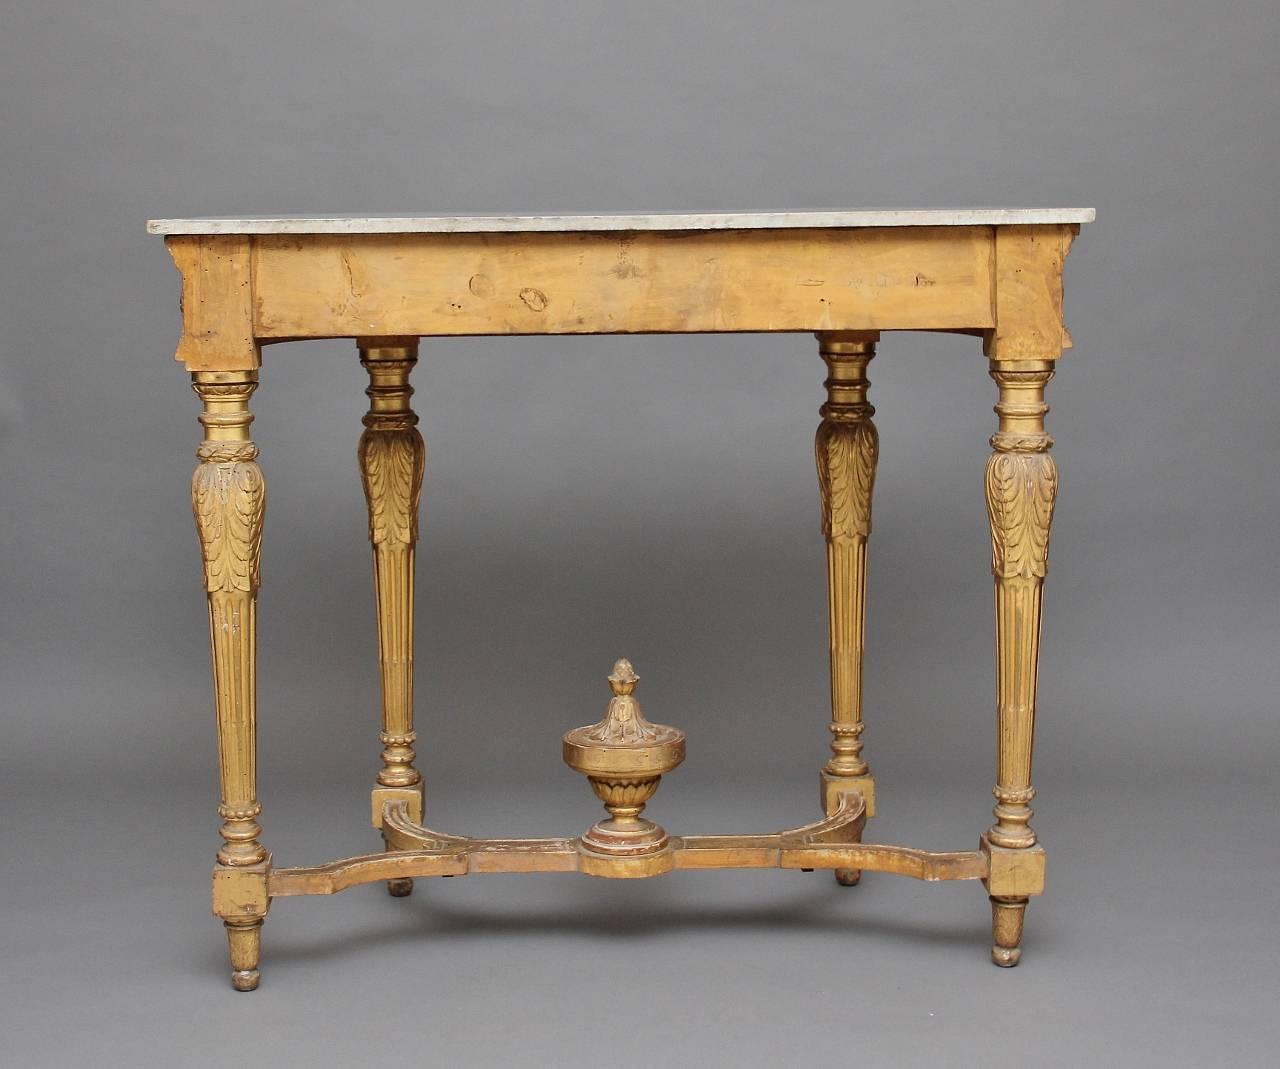 Late 19th Century 19th Century Gilt and Marble-Top Console Table